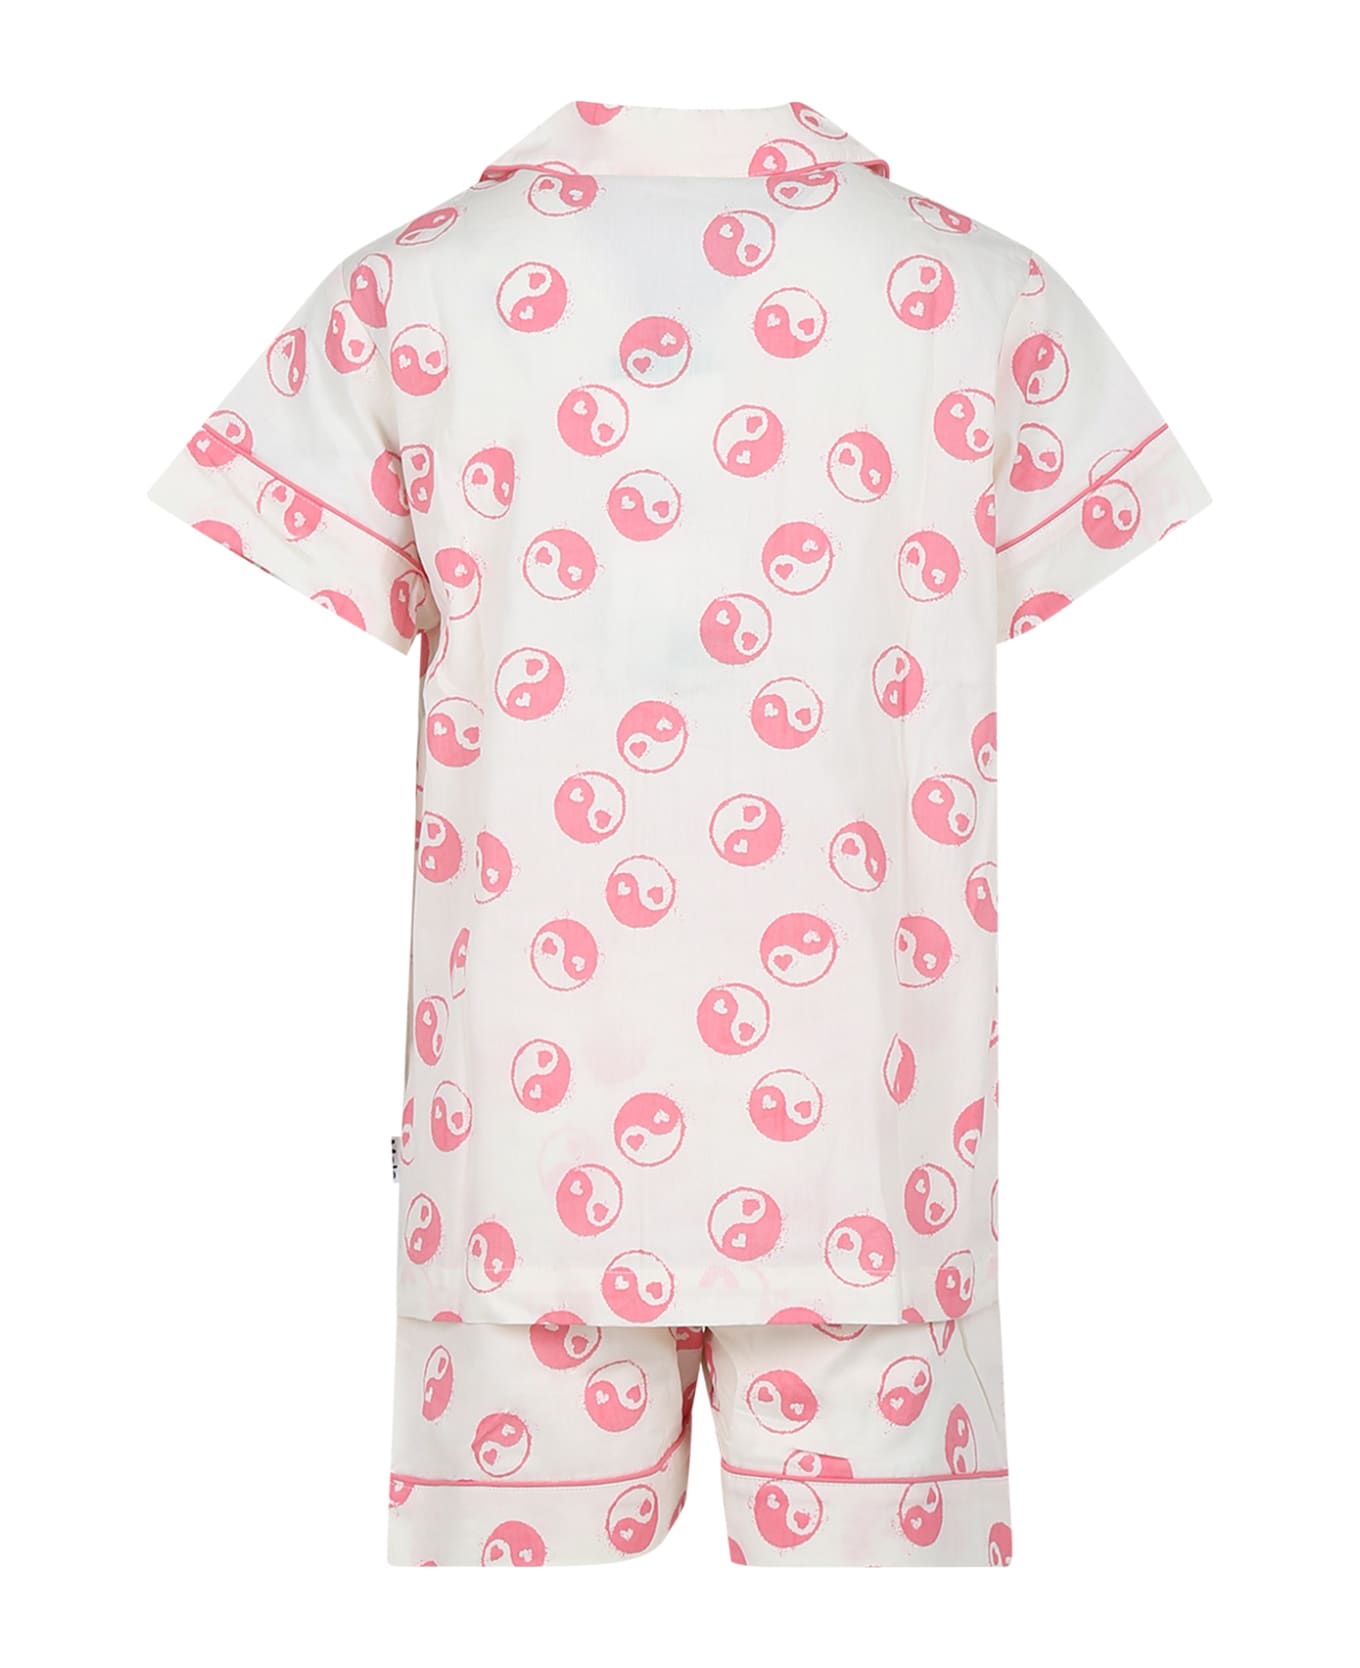 Molo White Pajamas For Kids With Smiley - Pink ジャンプスーツ